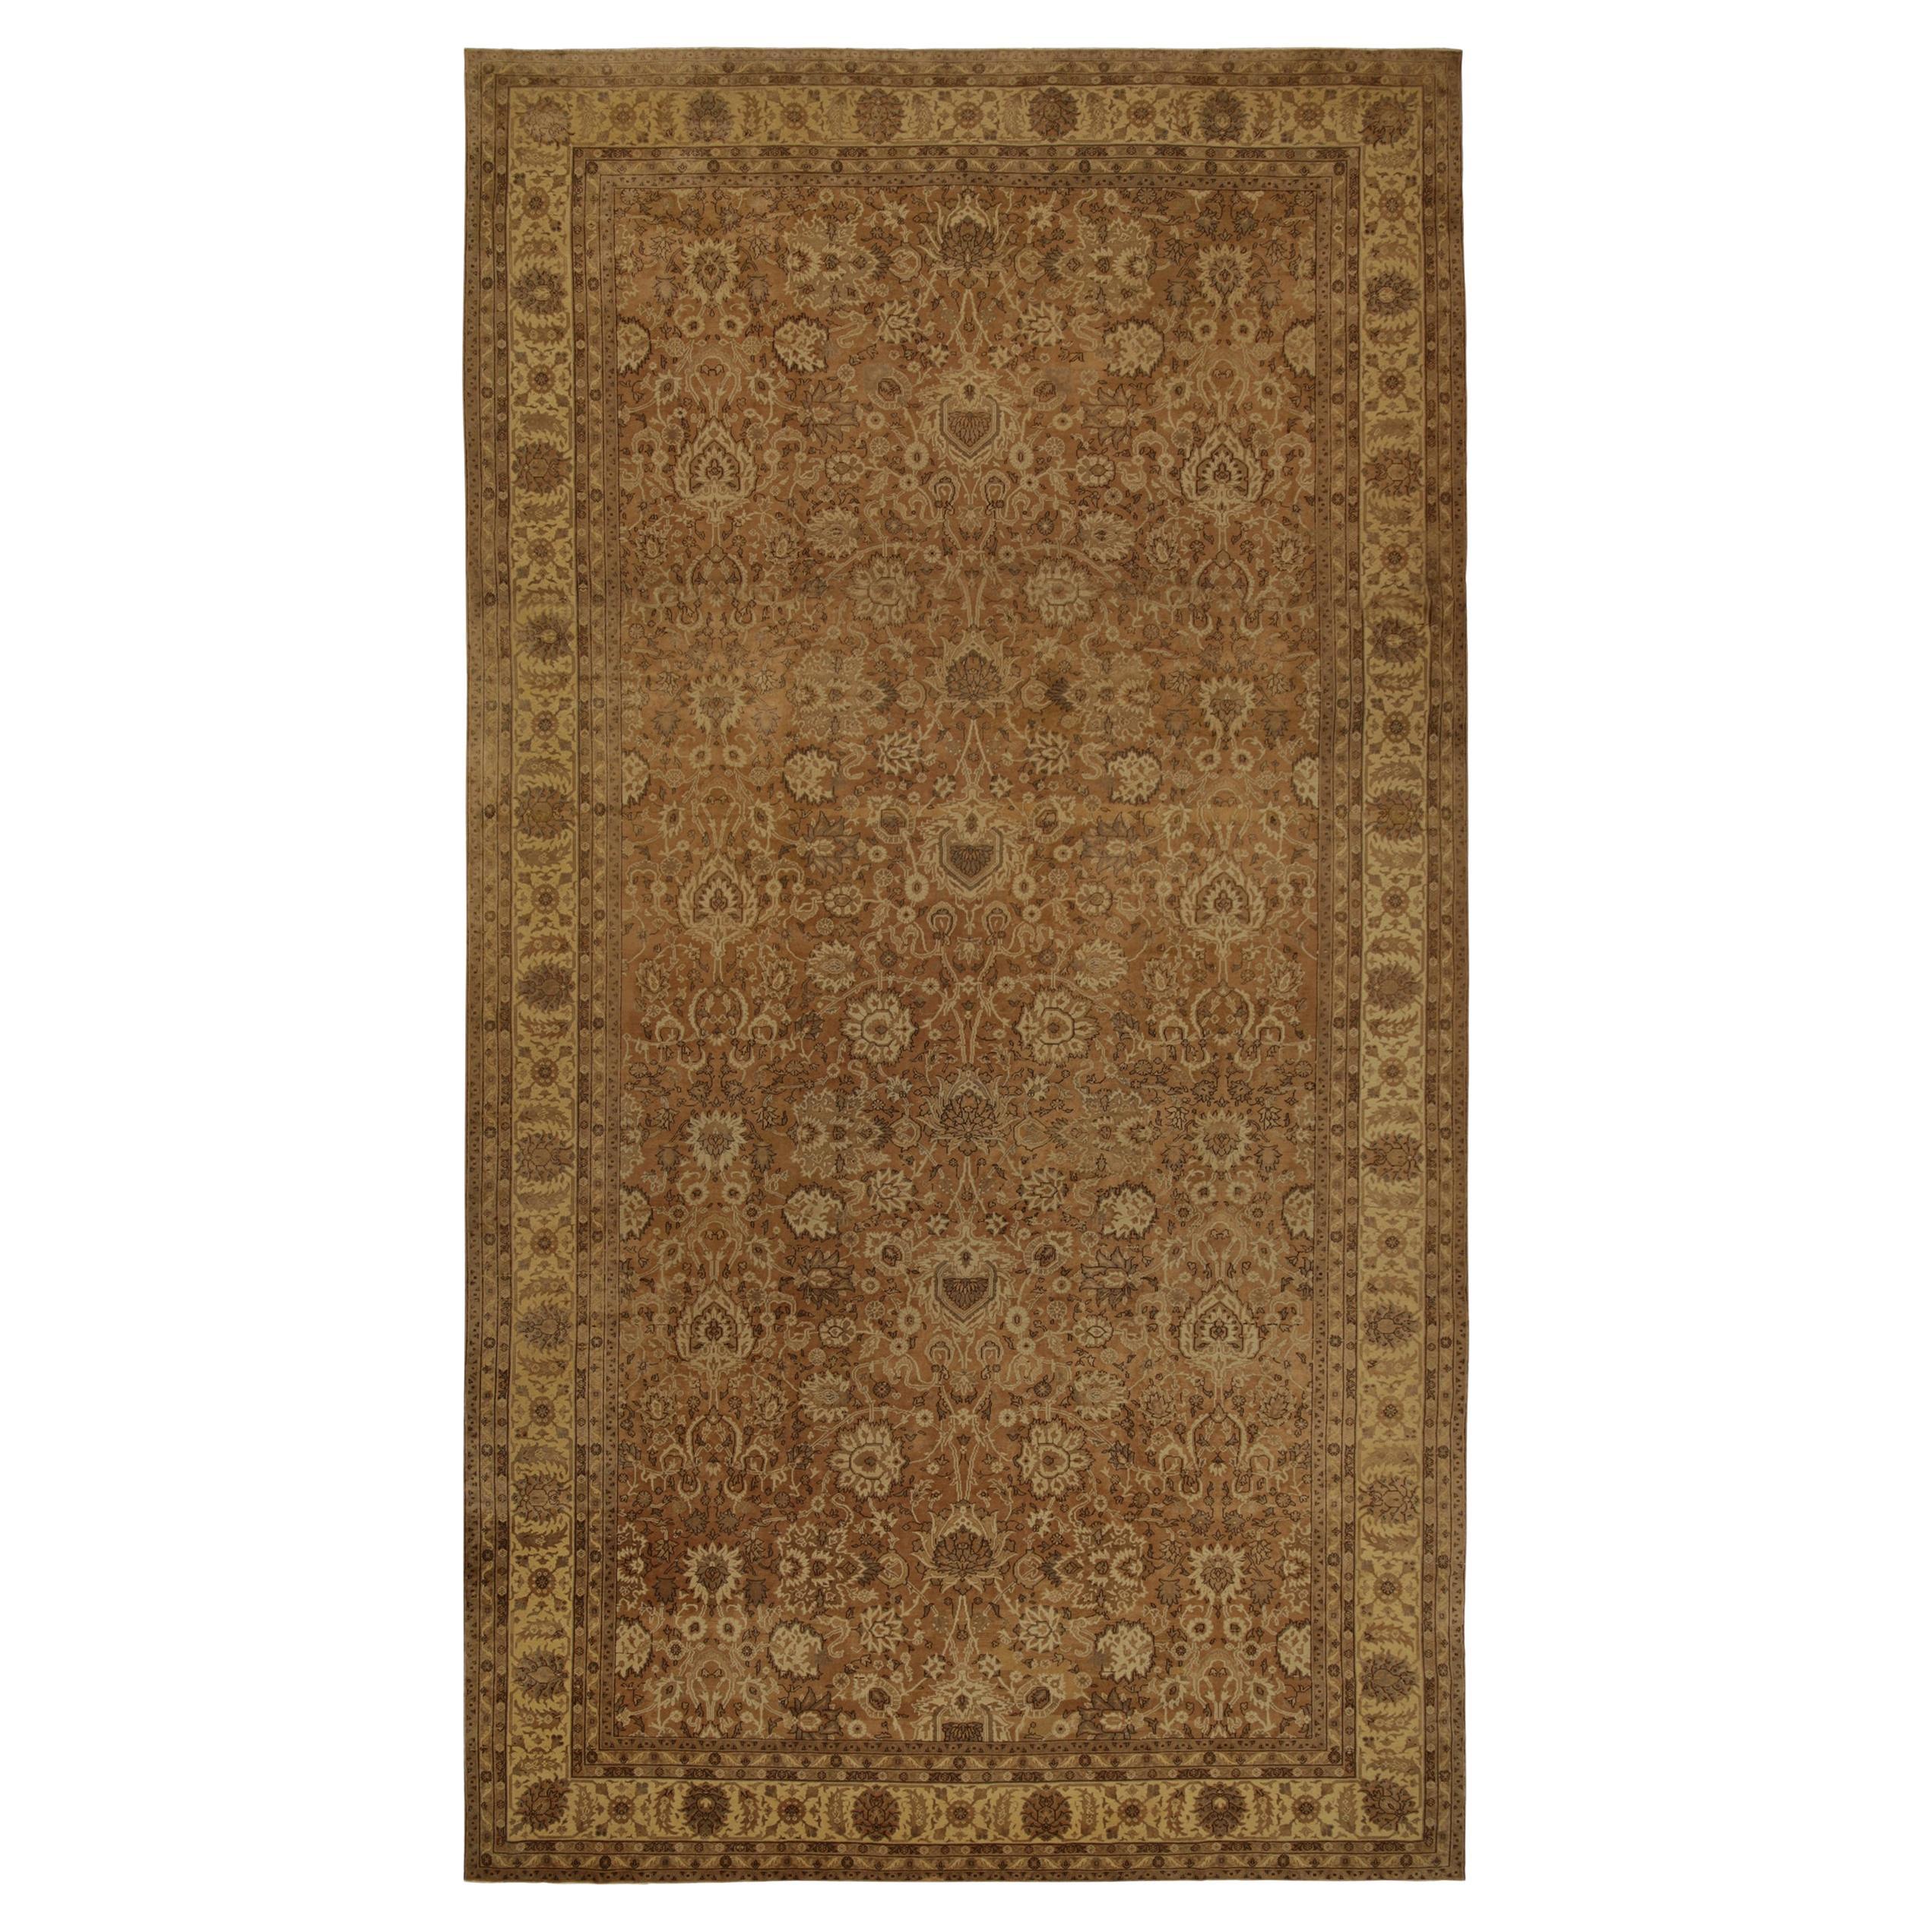 Antique Persian Rug in Beige-Brown and Gold Floral Patterns by Rug & Kilim